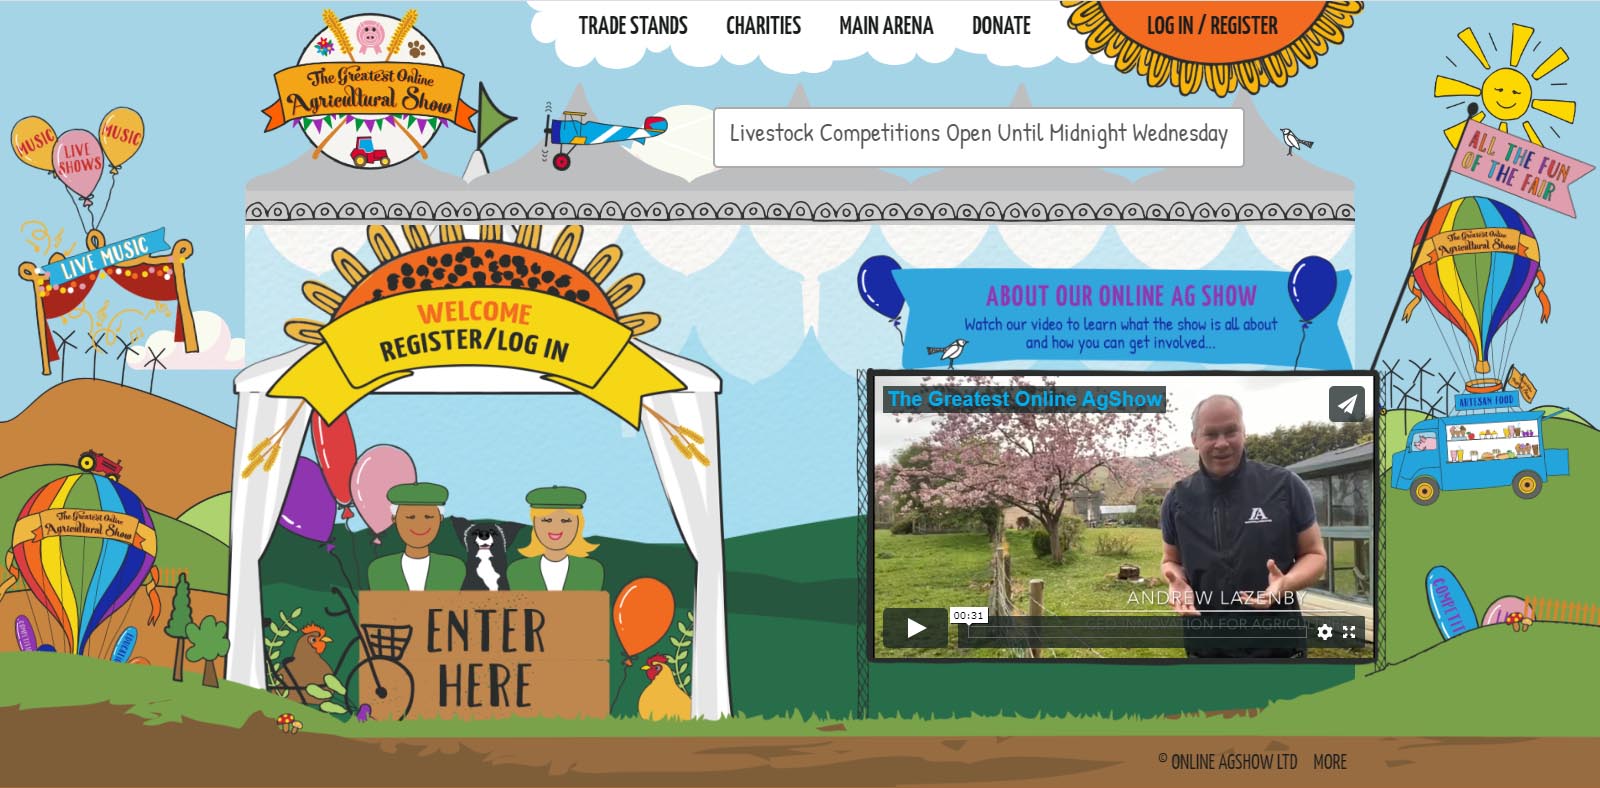 Webpage with text and images for the Greatest Online Agricultural Show 